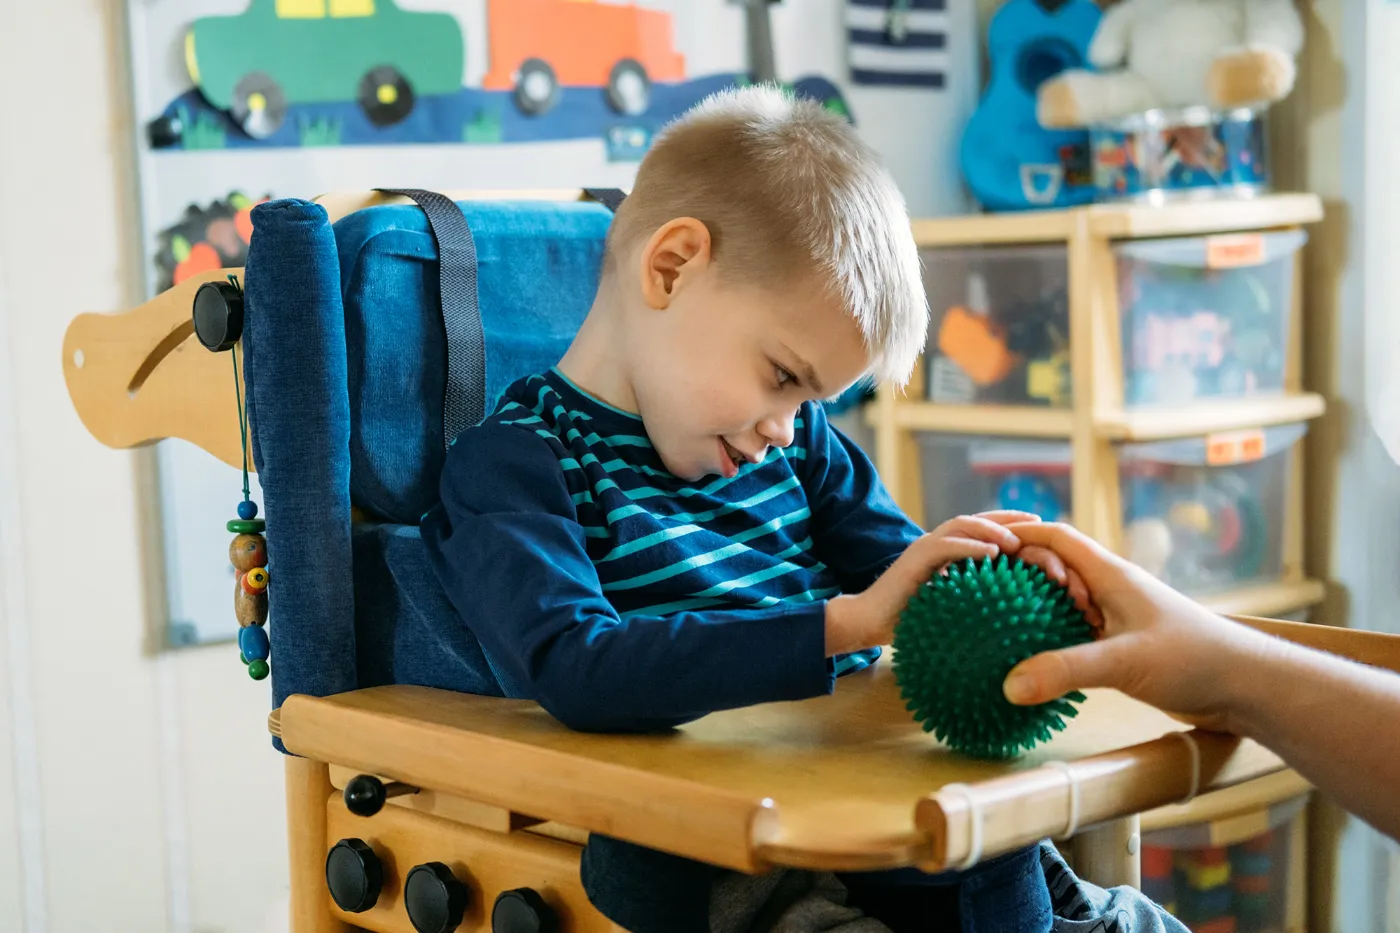 Little boy with cerebral palsy in a special chair at school. Our Kansas City lawyers can help if your child has been diagnosed with cerebral palsy due to a birth injury.